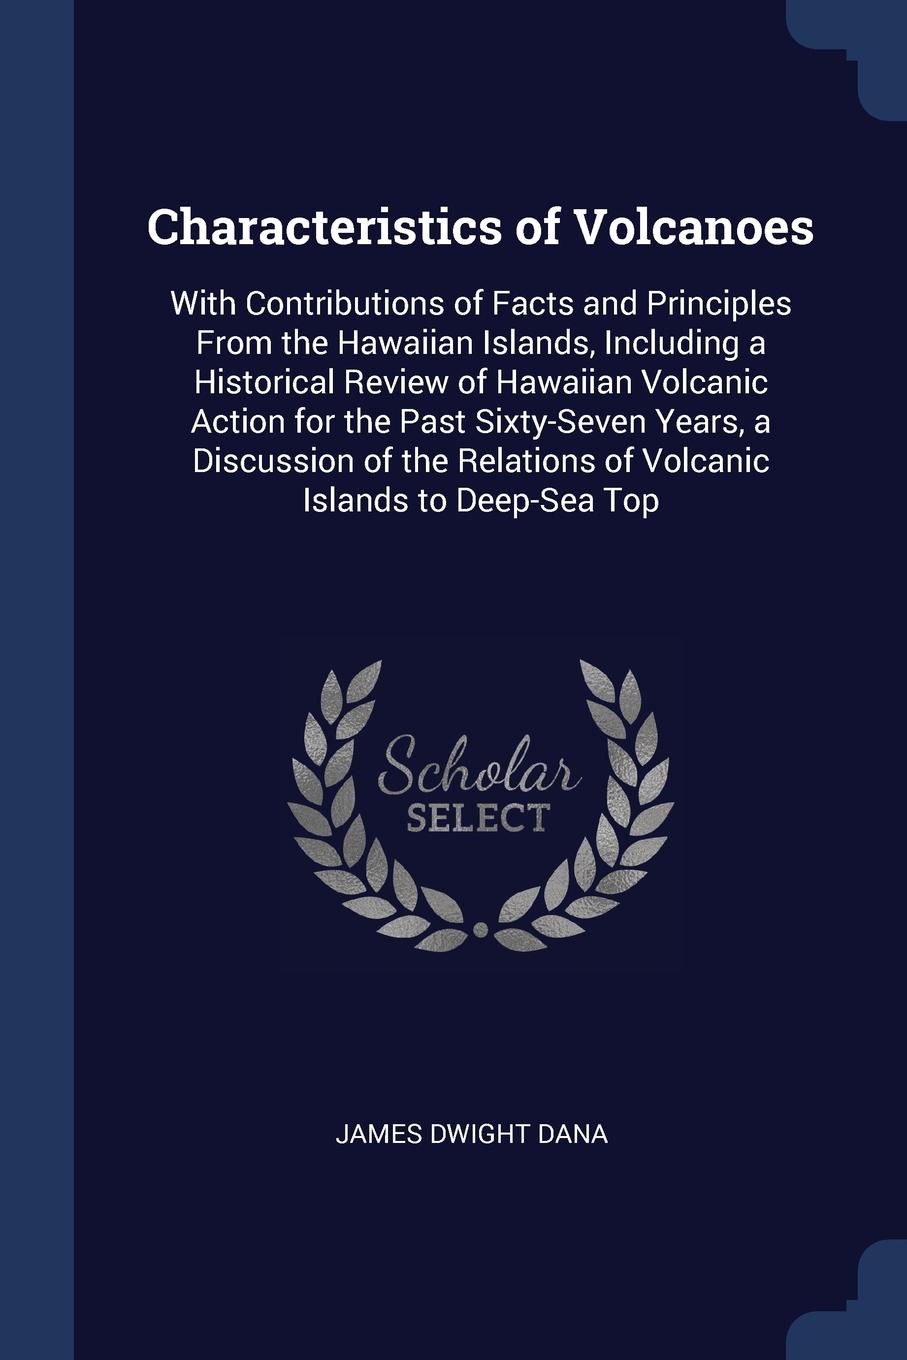 Characteristics of Volcanoes. With Contributions of Facts and Principles From the Hawaiian Islands, Including a Historical Review of Hawaiian Volcanic Action for the Past Sixty-Seven Years, a Discussion of the Relations of Volcanic Islands to Deep...